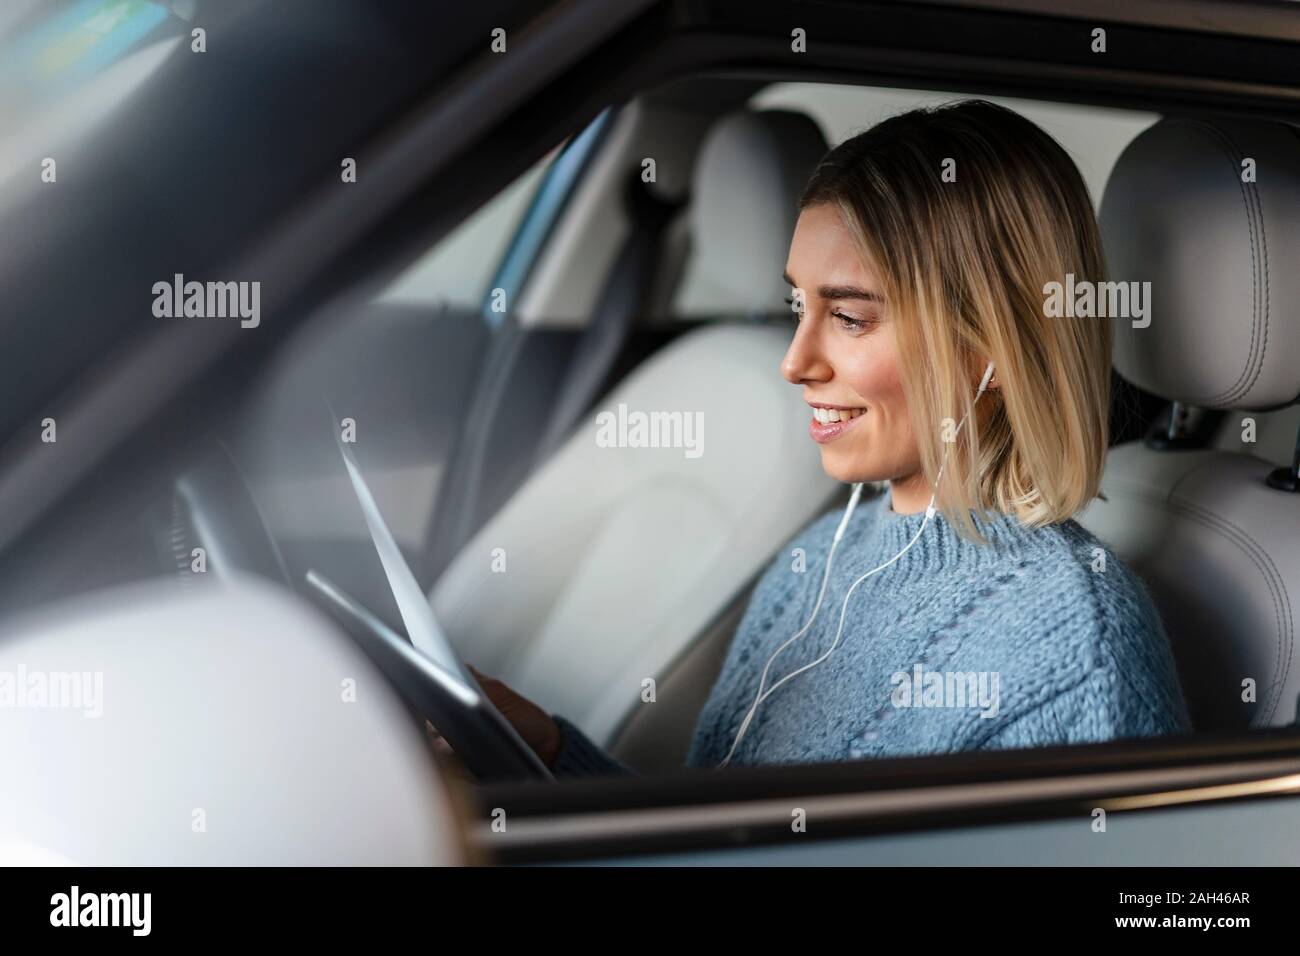 Smiling young woman with documents, tablet and earphones in a car Stock Photo